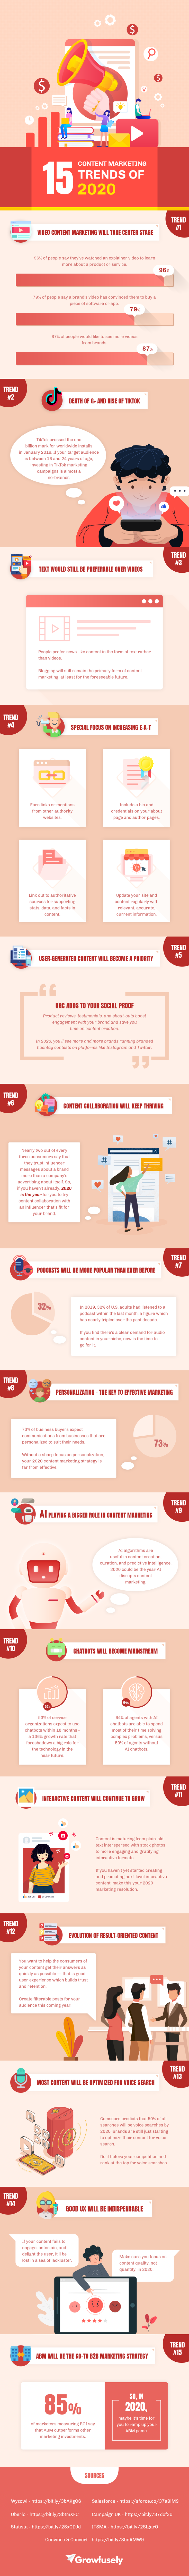 infographic-of-15-content-marketing-trends